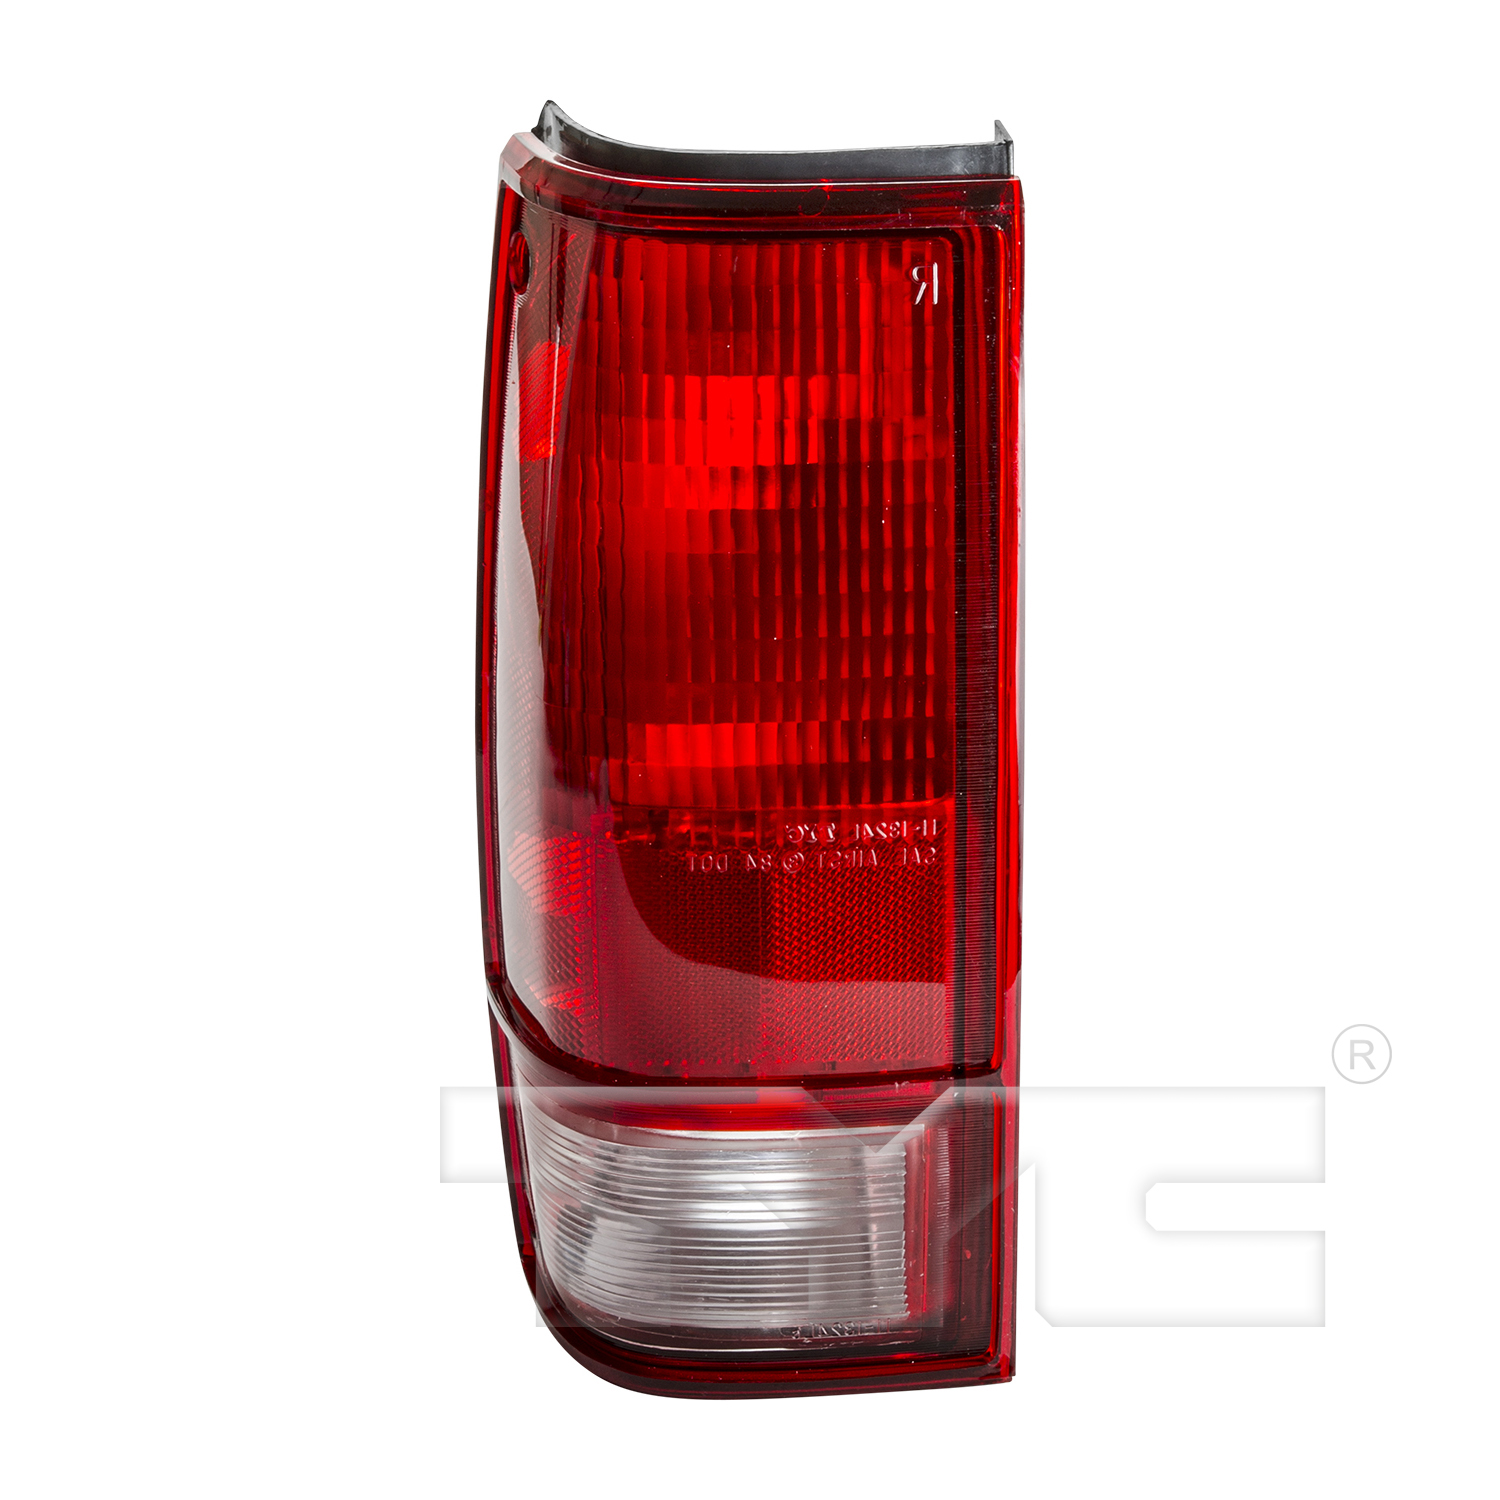 Aftermarket TAILLIGHTS for GMC - SONOMA, SONOMA,91-93,LT Taillamp assy